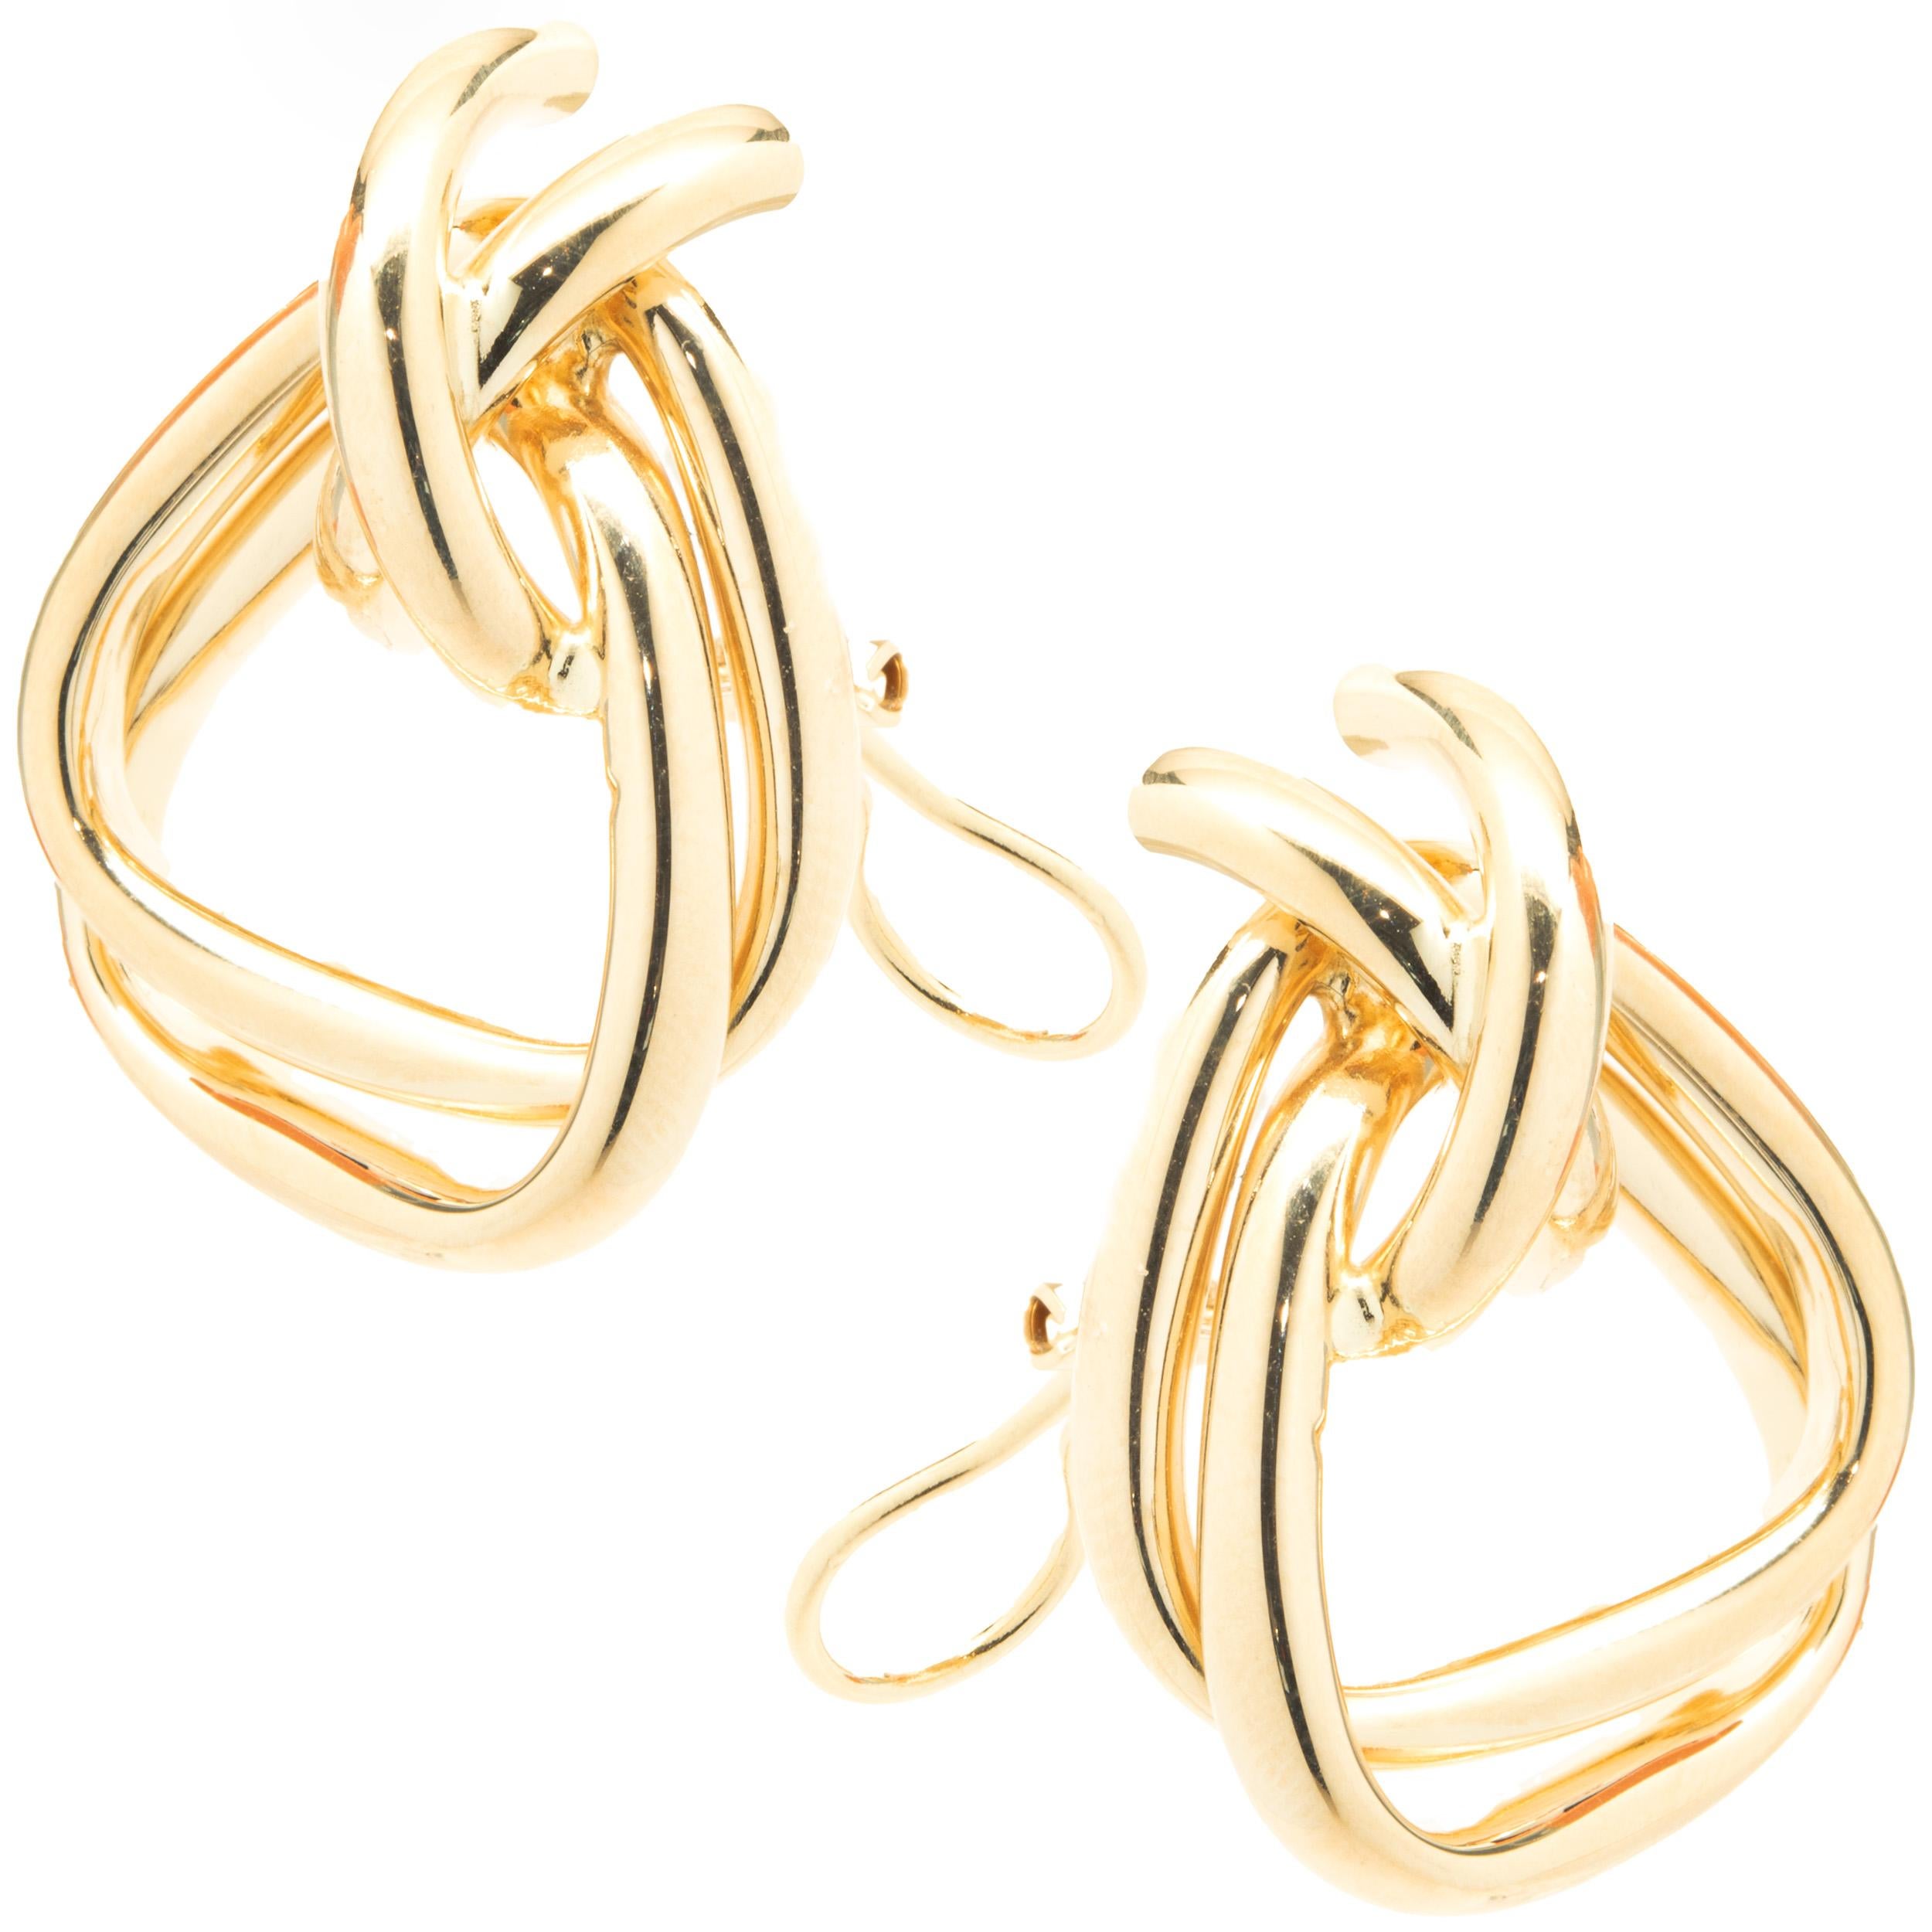 Material: 14K yellow gold
Dimensions: earrings measure 32 x 23mm in length
Weight:  8.00 grams
